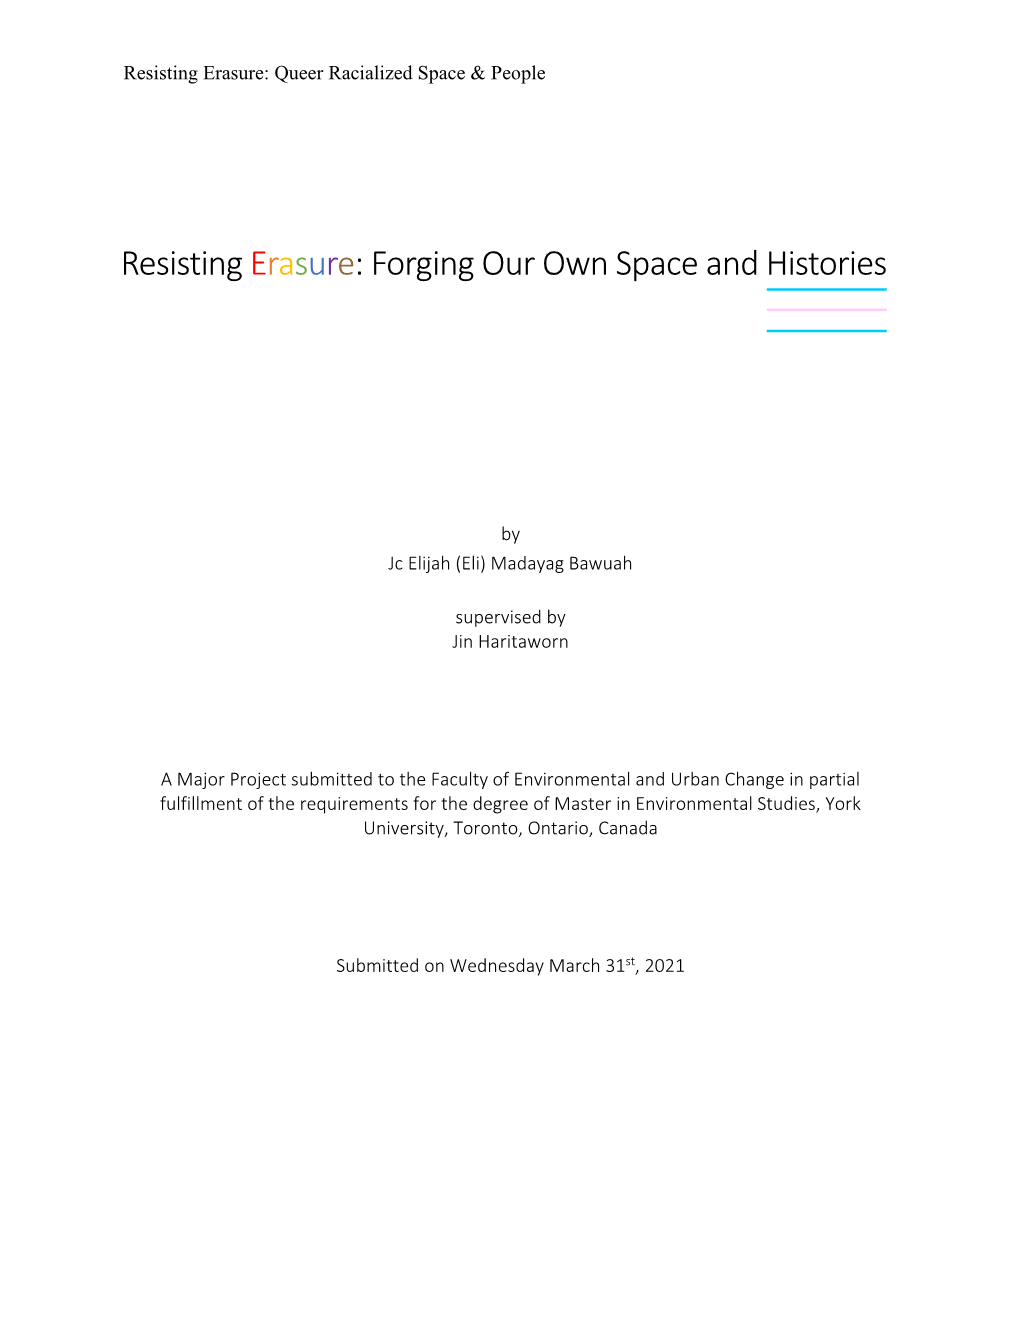 Resisting Erasure: Forging Our Own Space and Histories